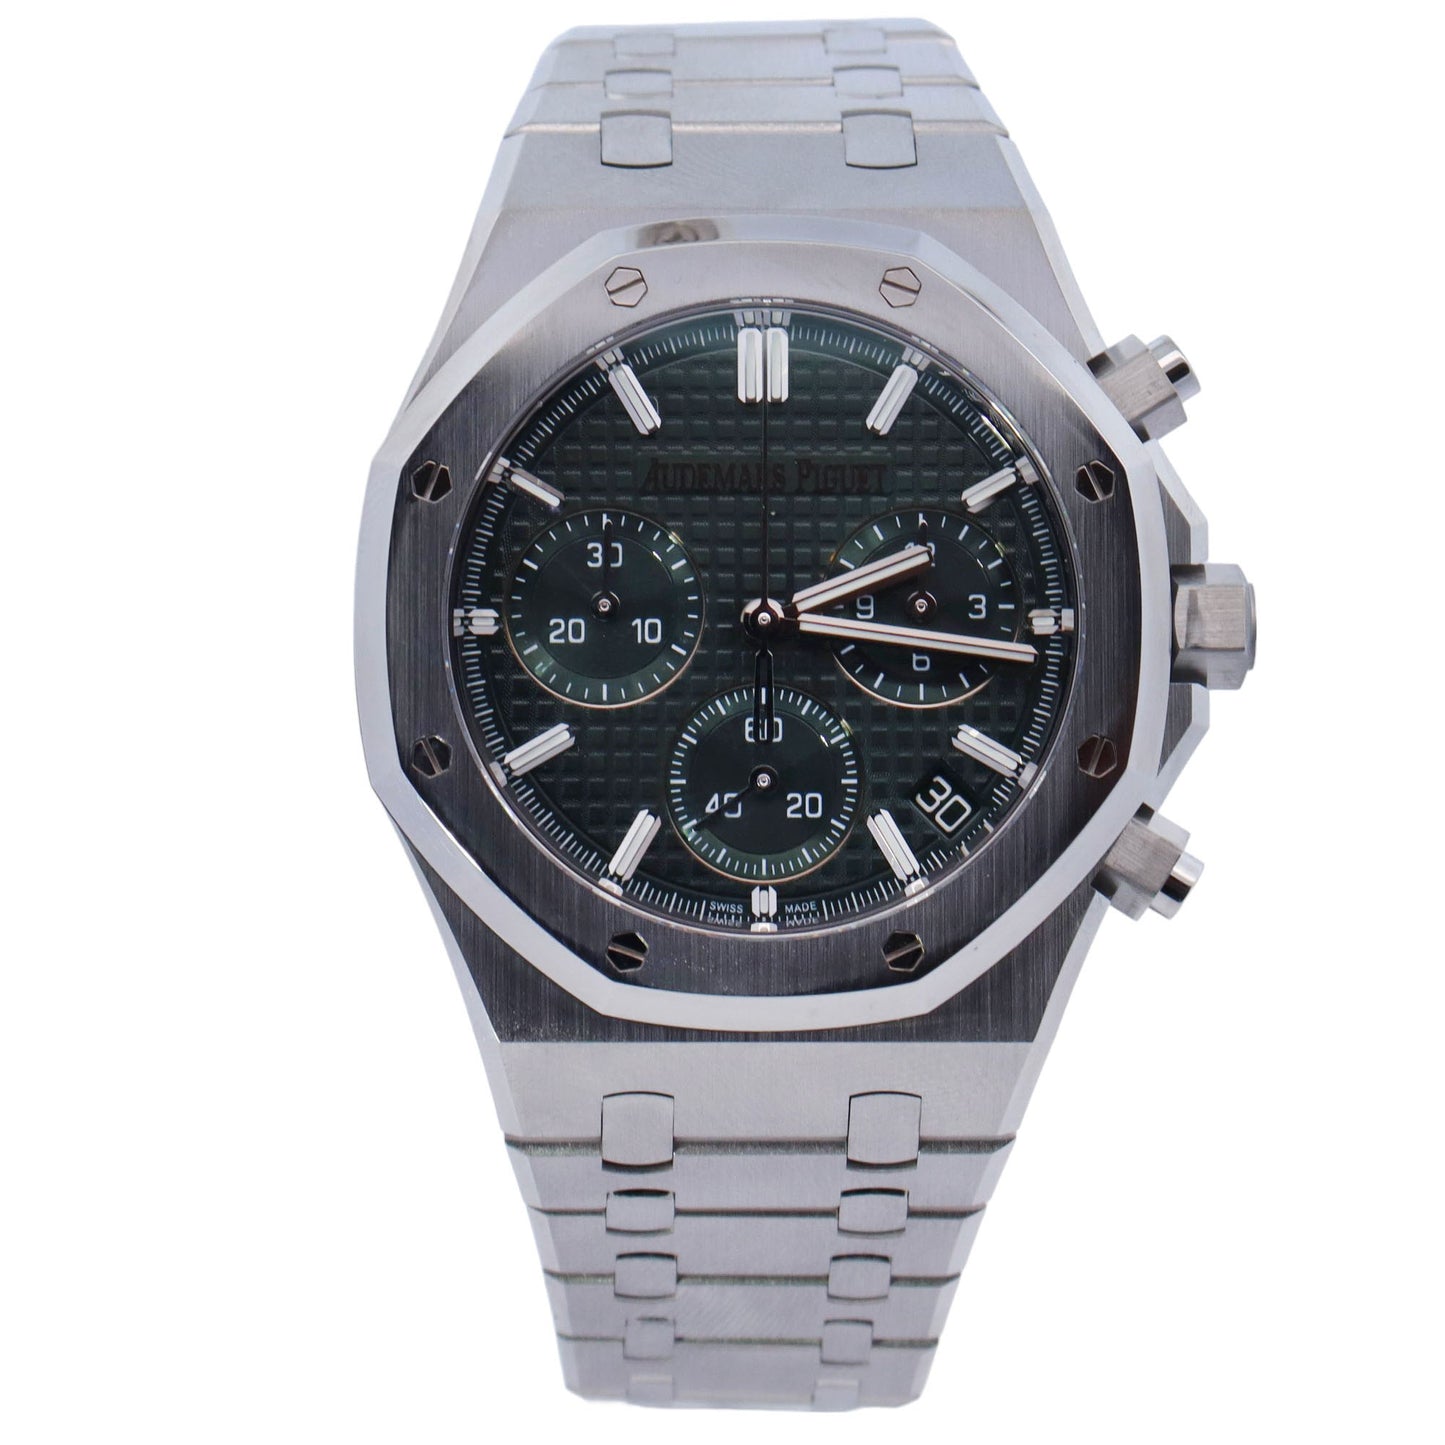 Audemars Piguet Royal Oak Stainless Steel 41mm Olive Chronograph Dial Watch Reference# 26240ST.OO.1320ST.04 - Happy Jewelers Fine Jewelry Lifetime Warranty